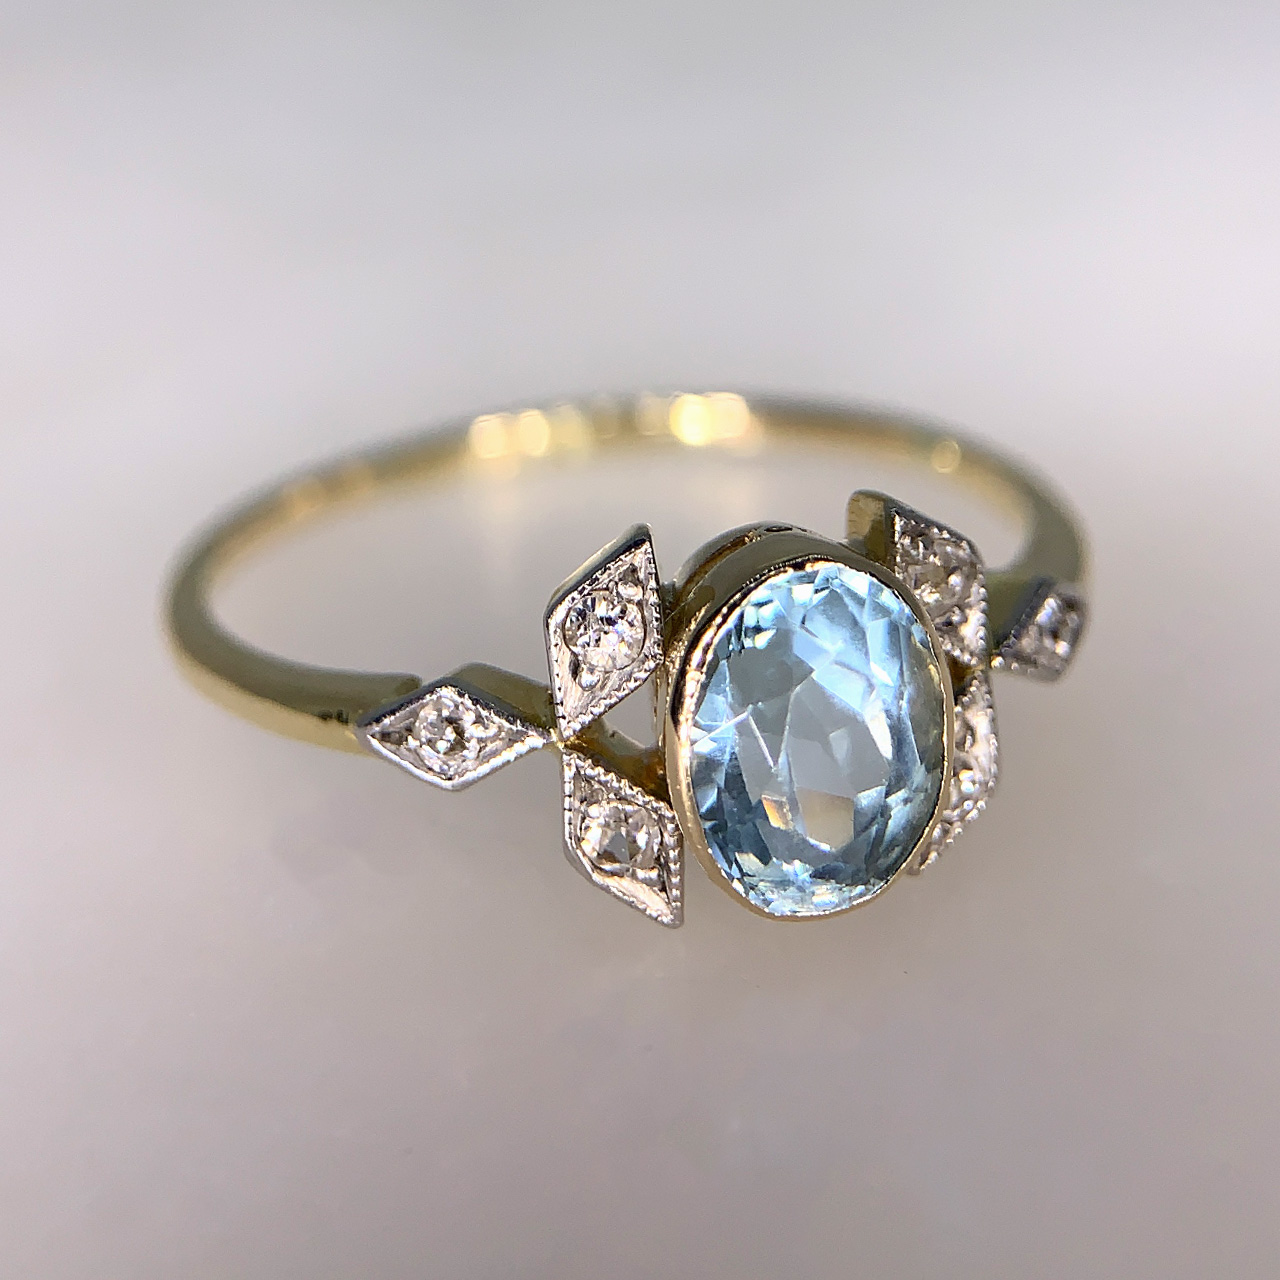 1940's Aquamarine and Diamond Solitaire Ring, in 18ct yellow gold with the diamonds set in platinum. The aquamarine measures 7.4mm x 5.9 mm.